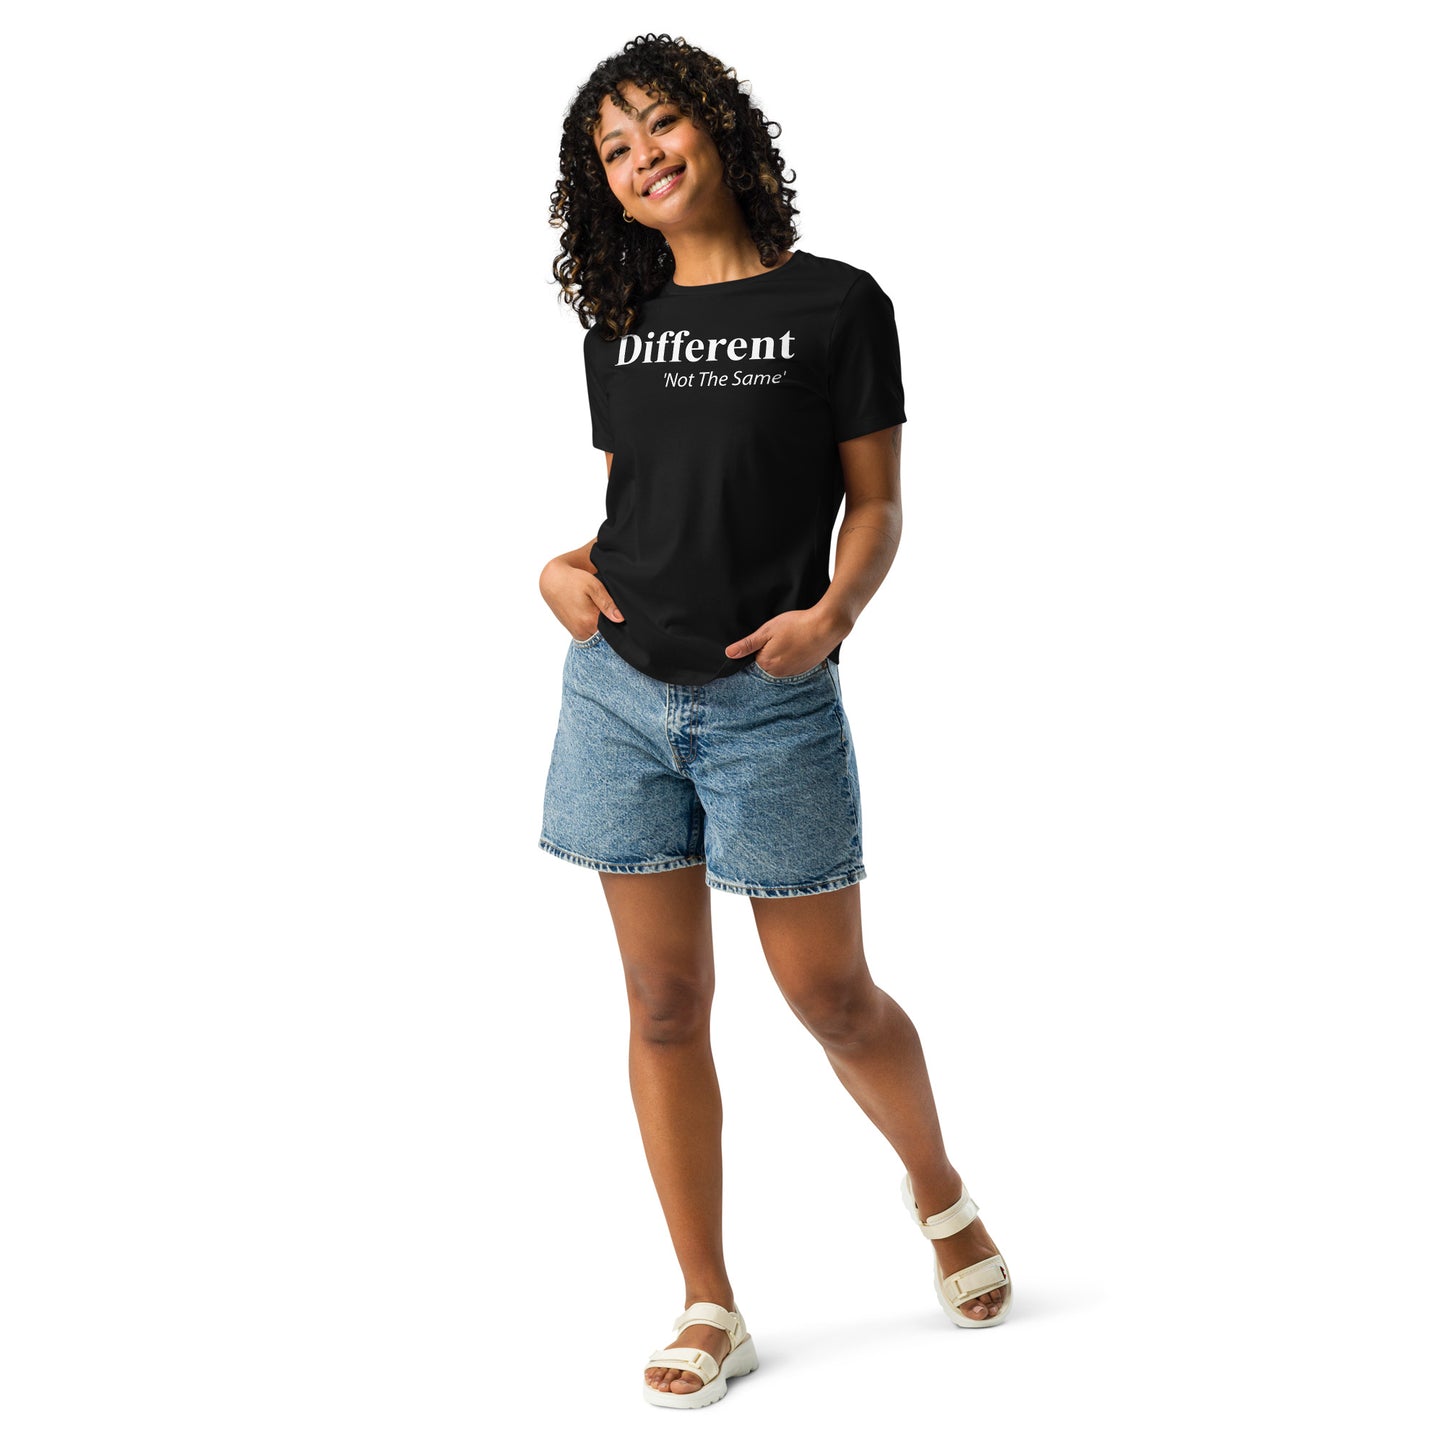 Different not the same  Women's Relaxed T-Shirt - Trendy and Cozy Women's Tee